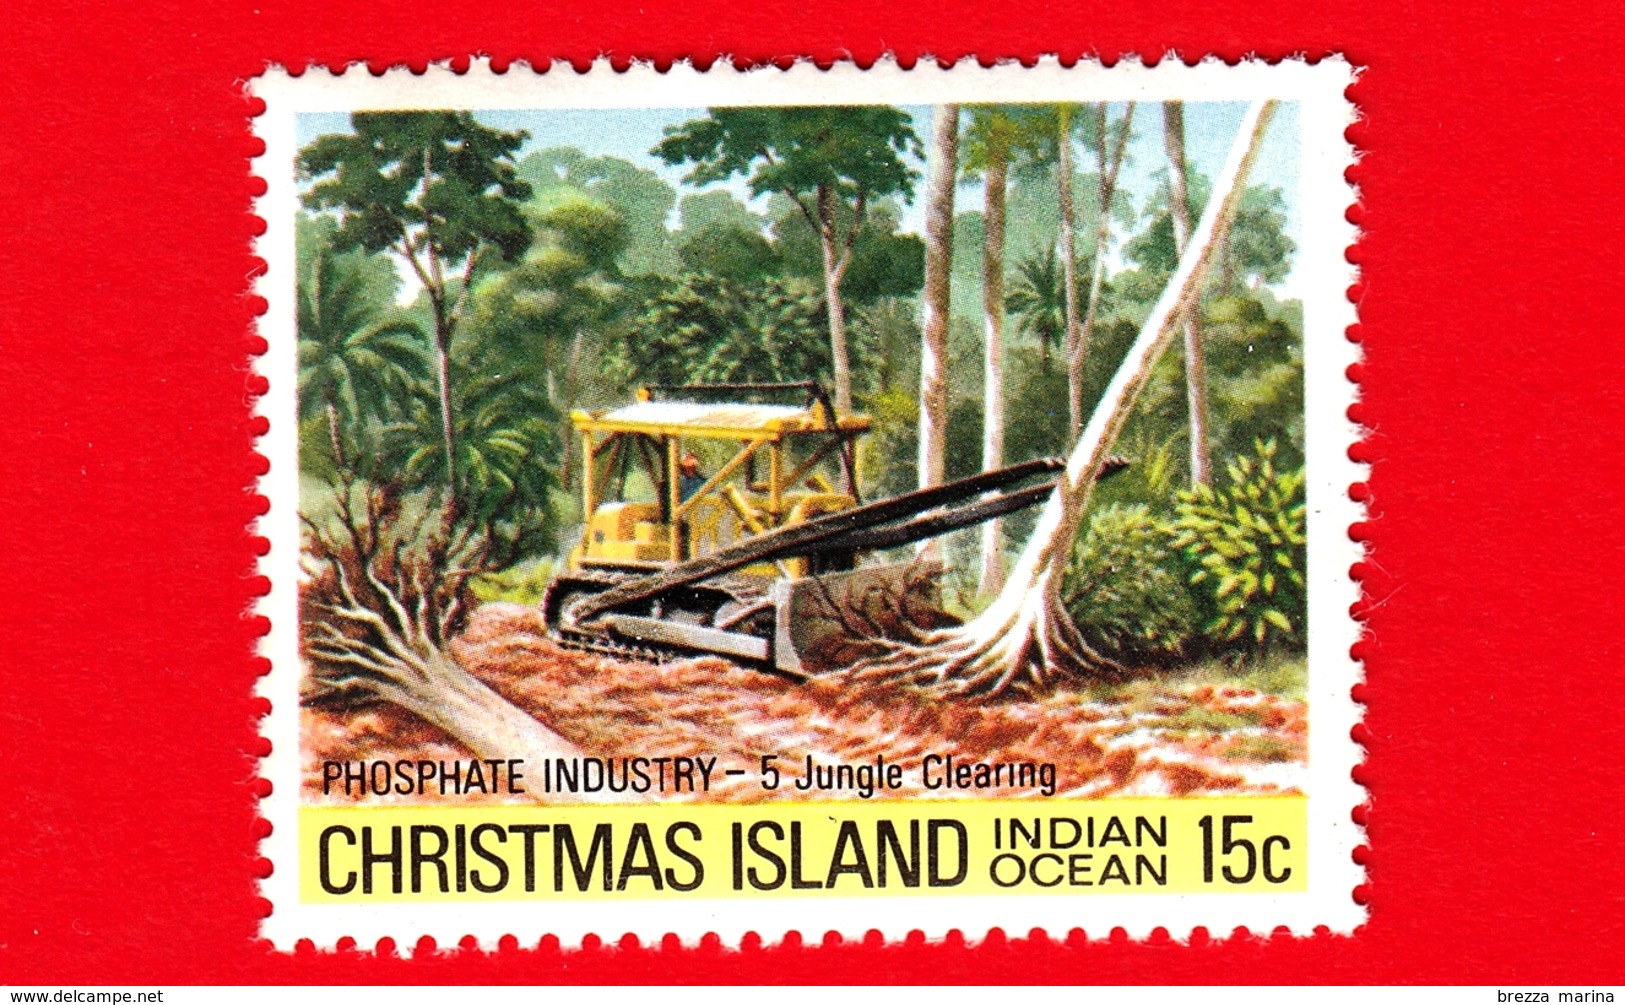 Nuovo - MNH - CHRISTMAS ISLAND  Isola Di Natale - 1980 - Industria Chimica - Phosphate - Jungle Clearing - 15 - Christmas Island